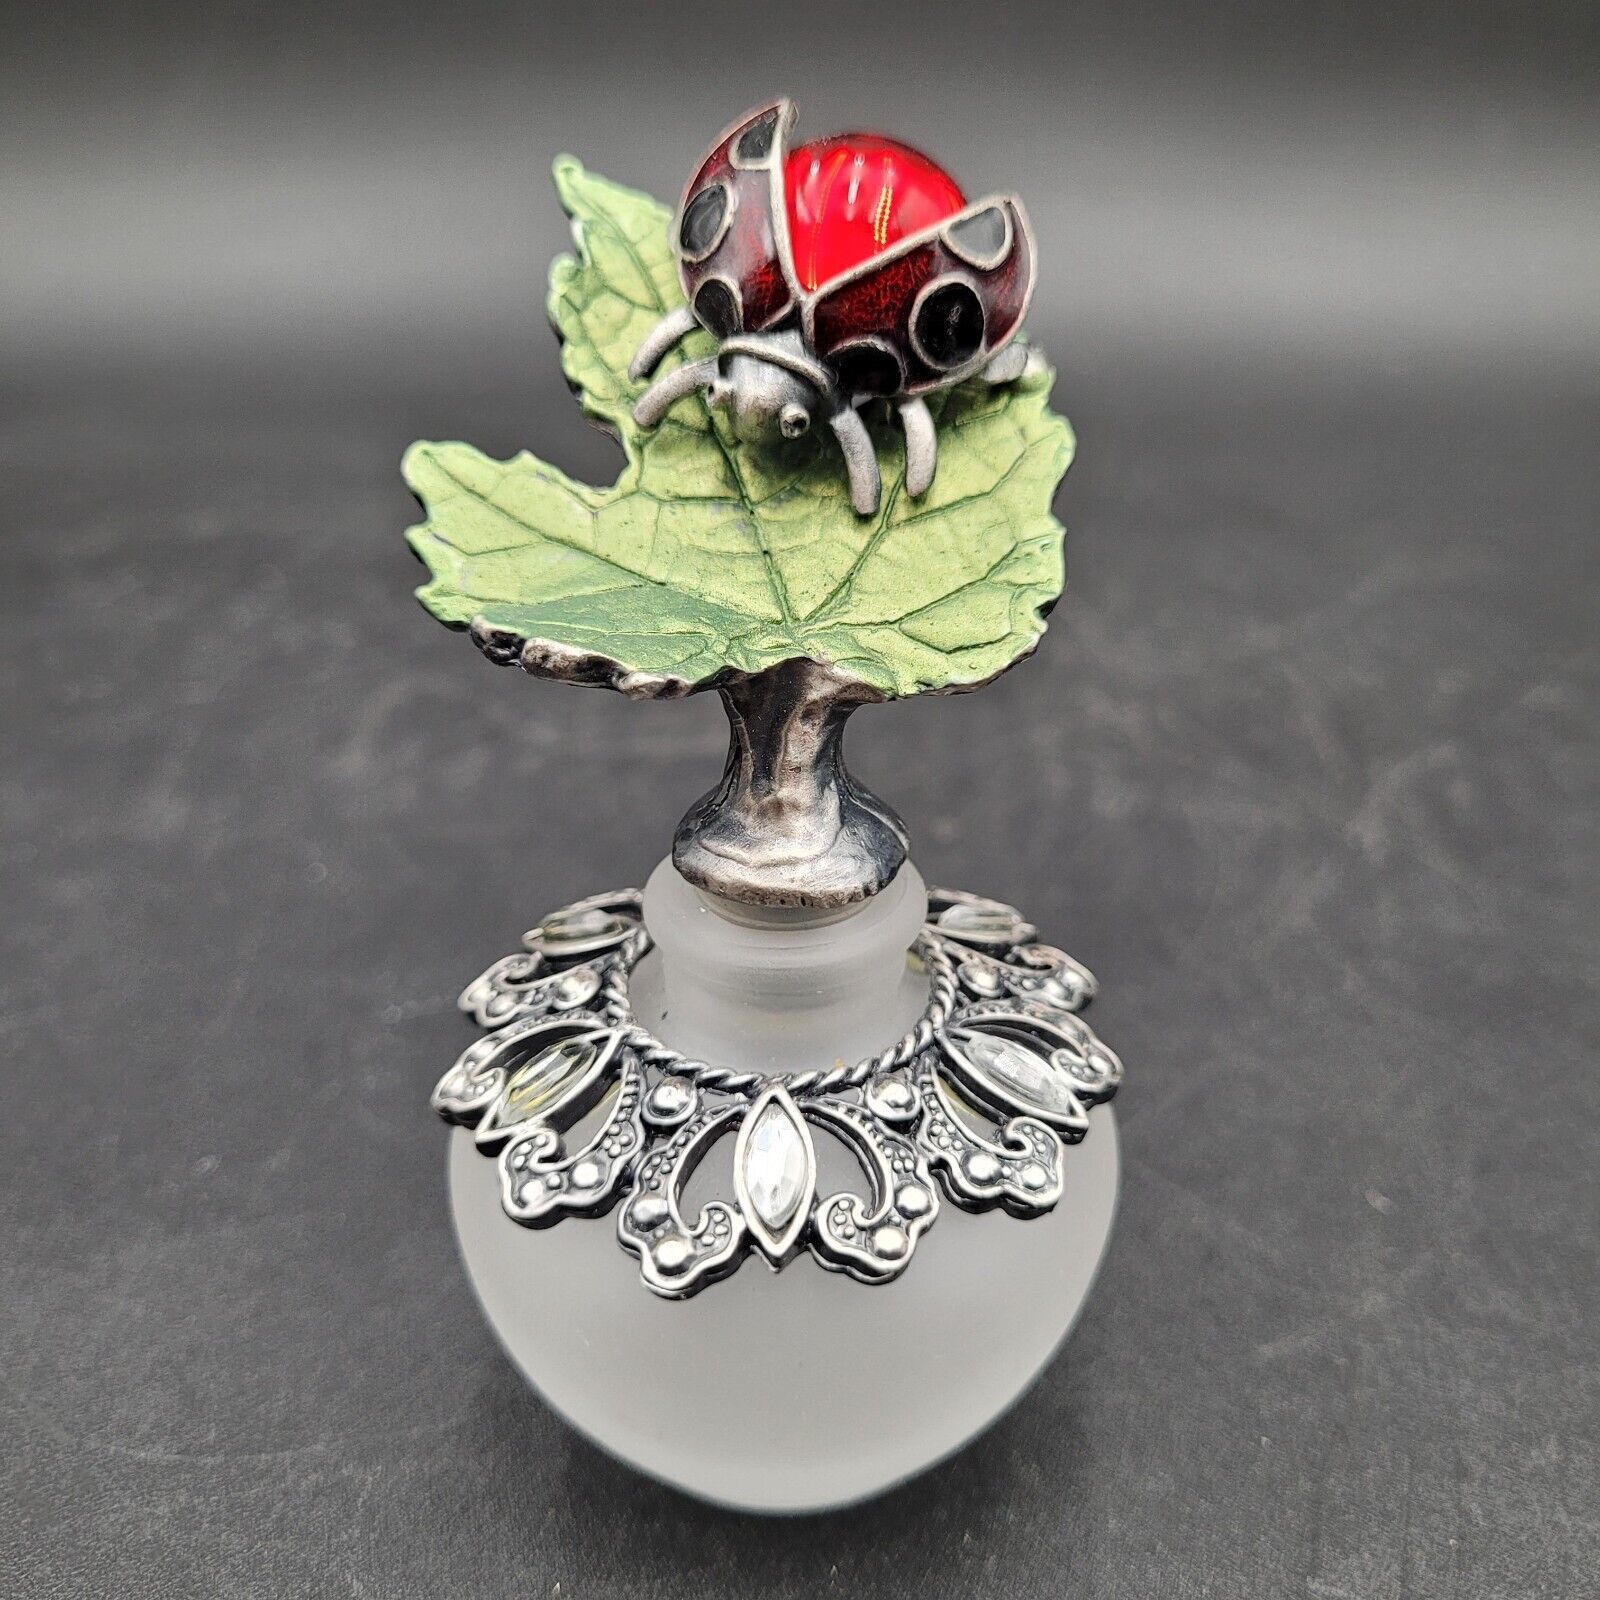 Primary image for Round Frosted Glass Hand Crafted Perfume Bottle Ladybug On Leaf Silver Overlay